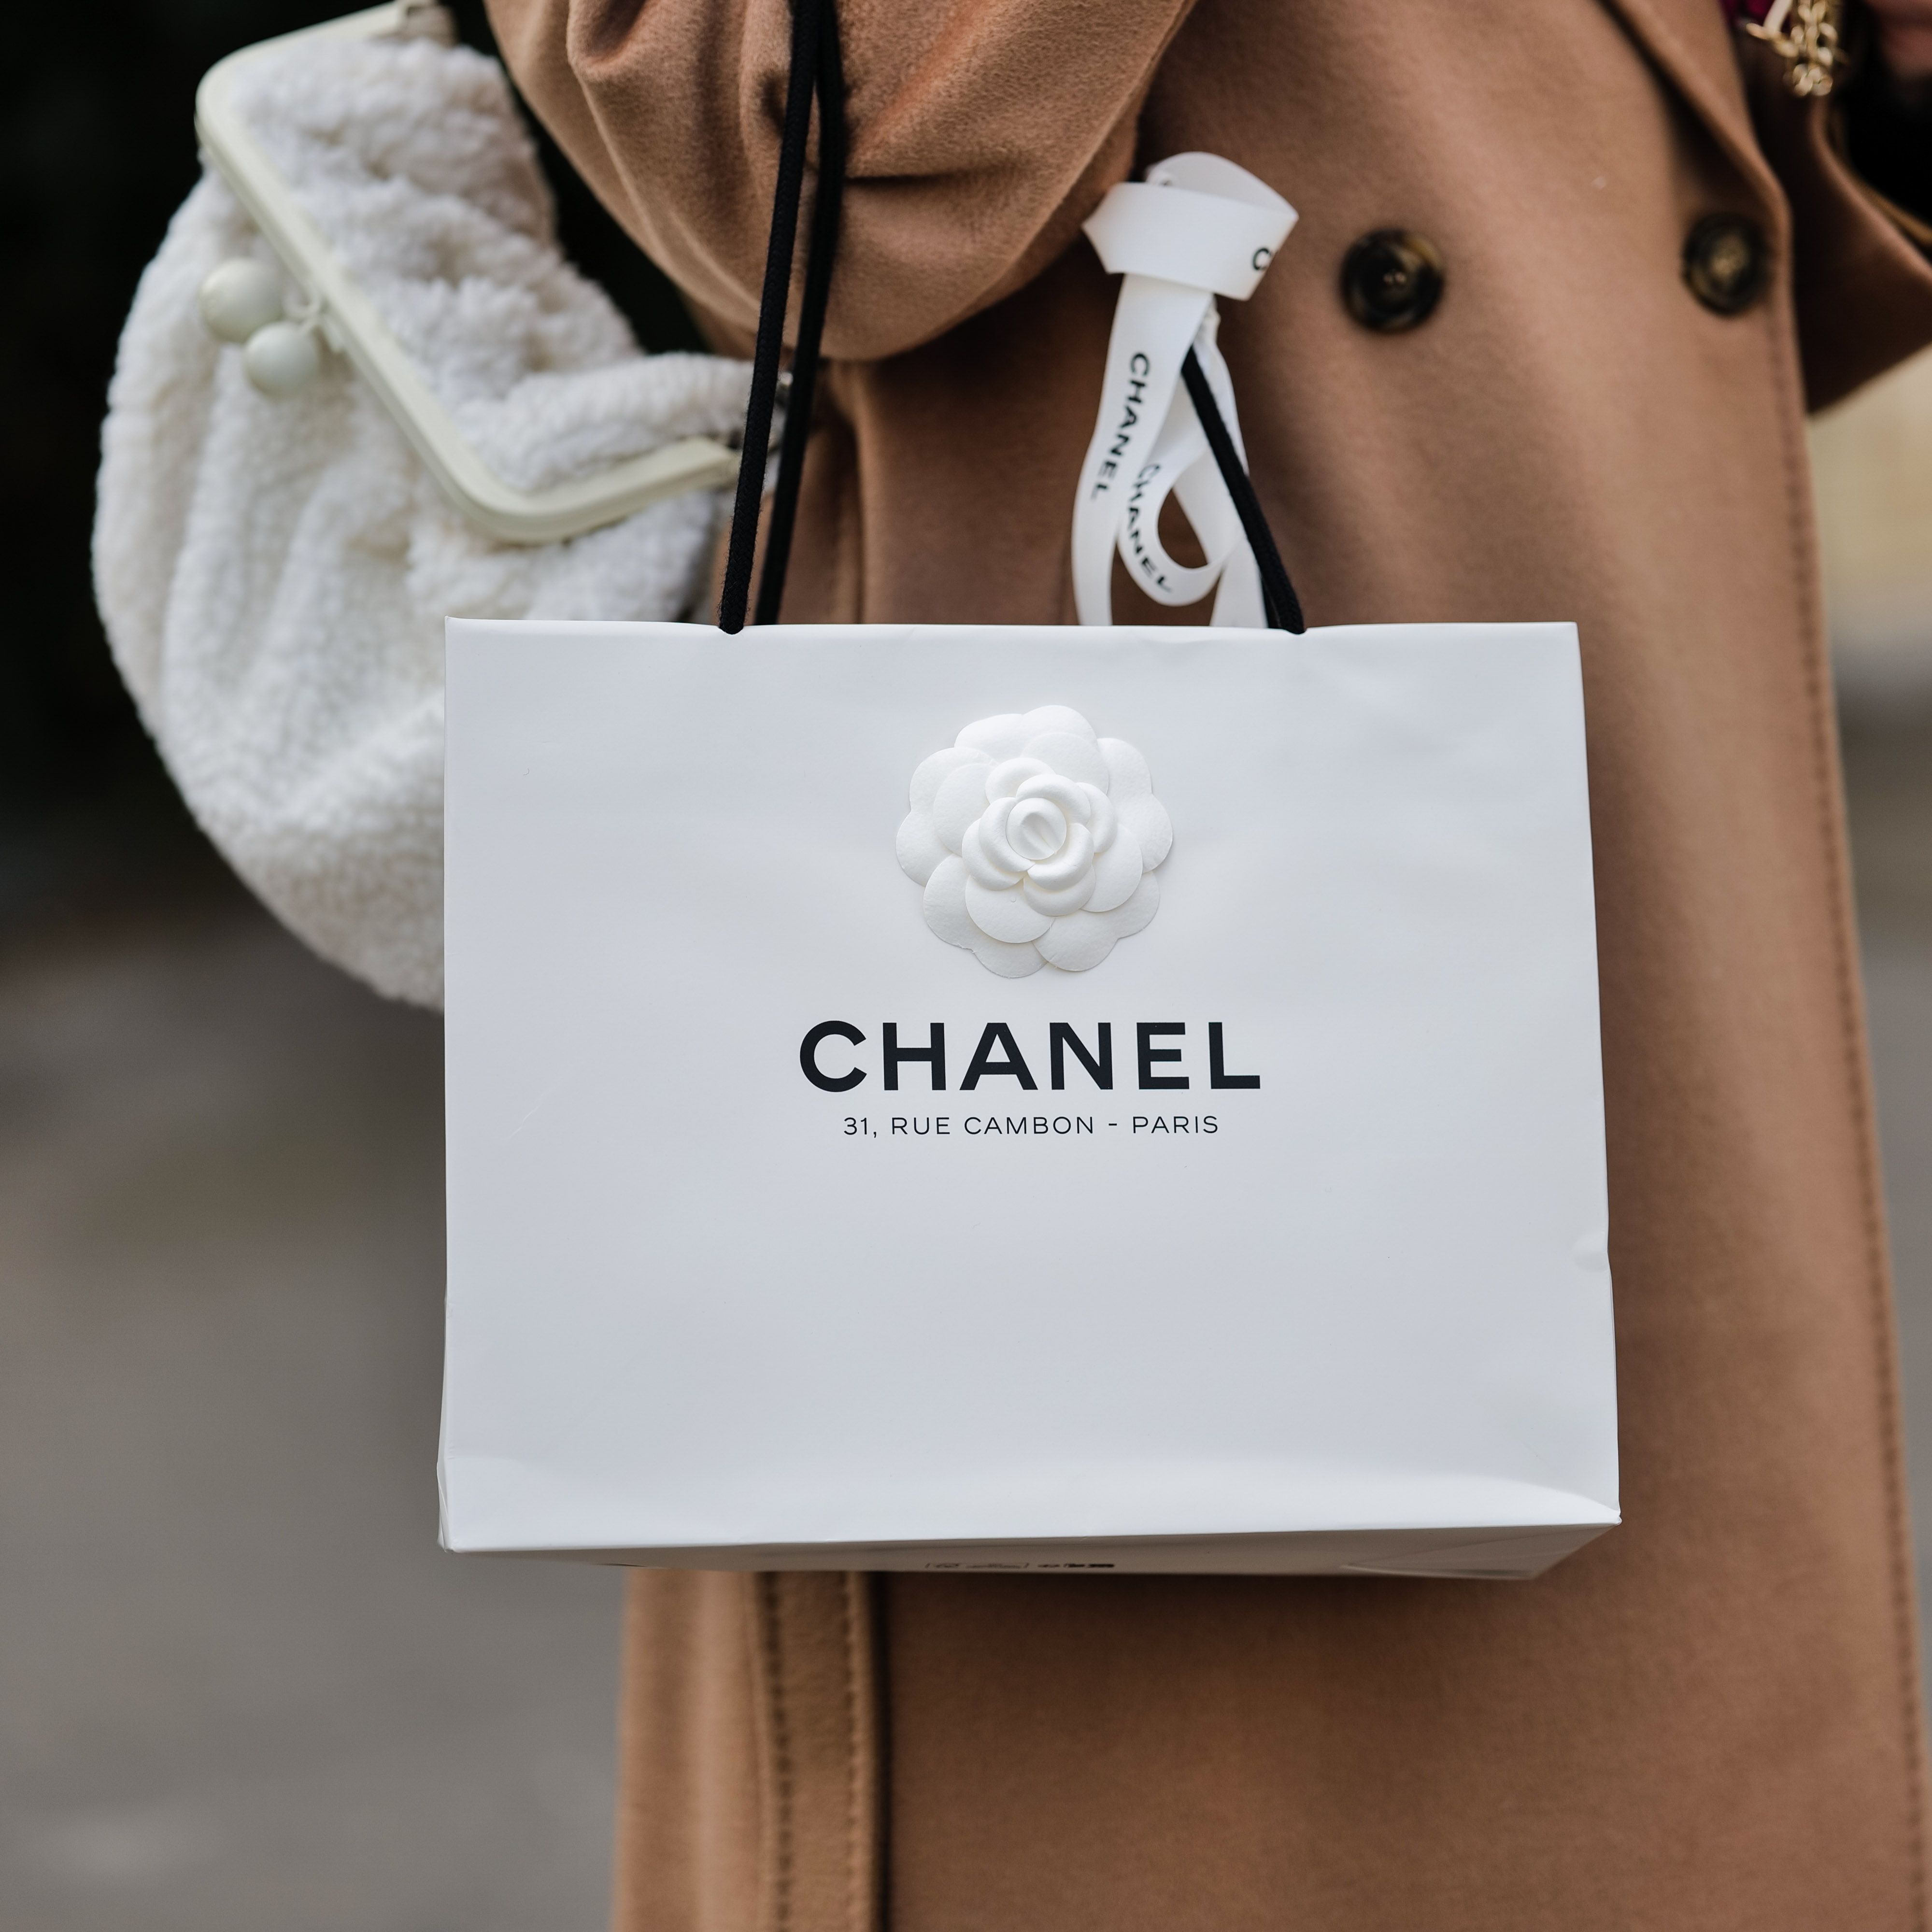 20 percent off Chanel and free Prime shipping? Yes please.